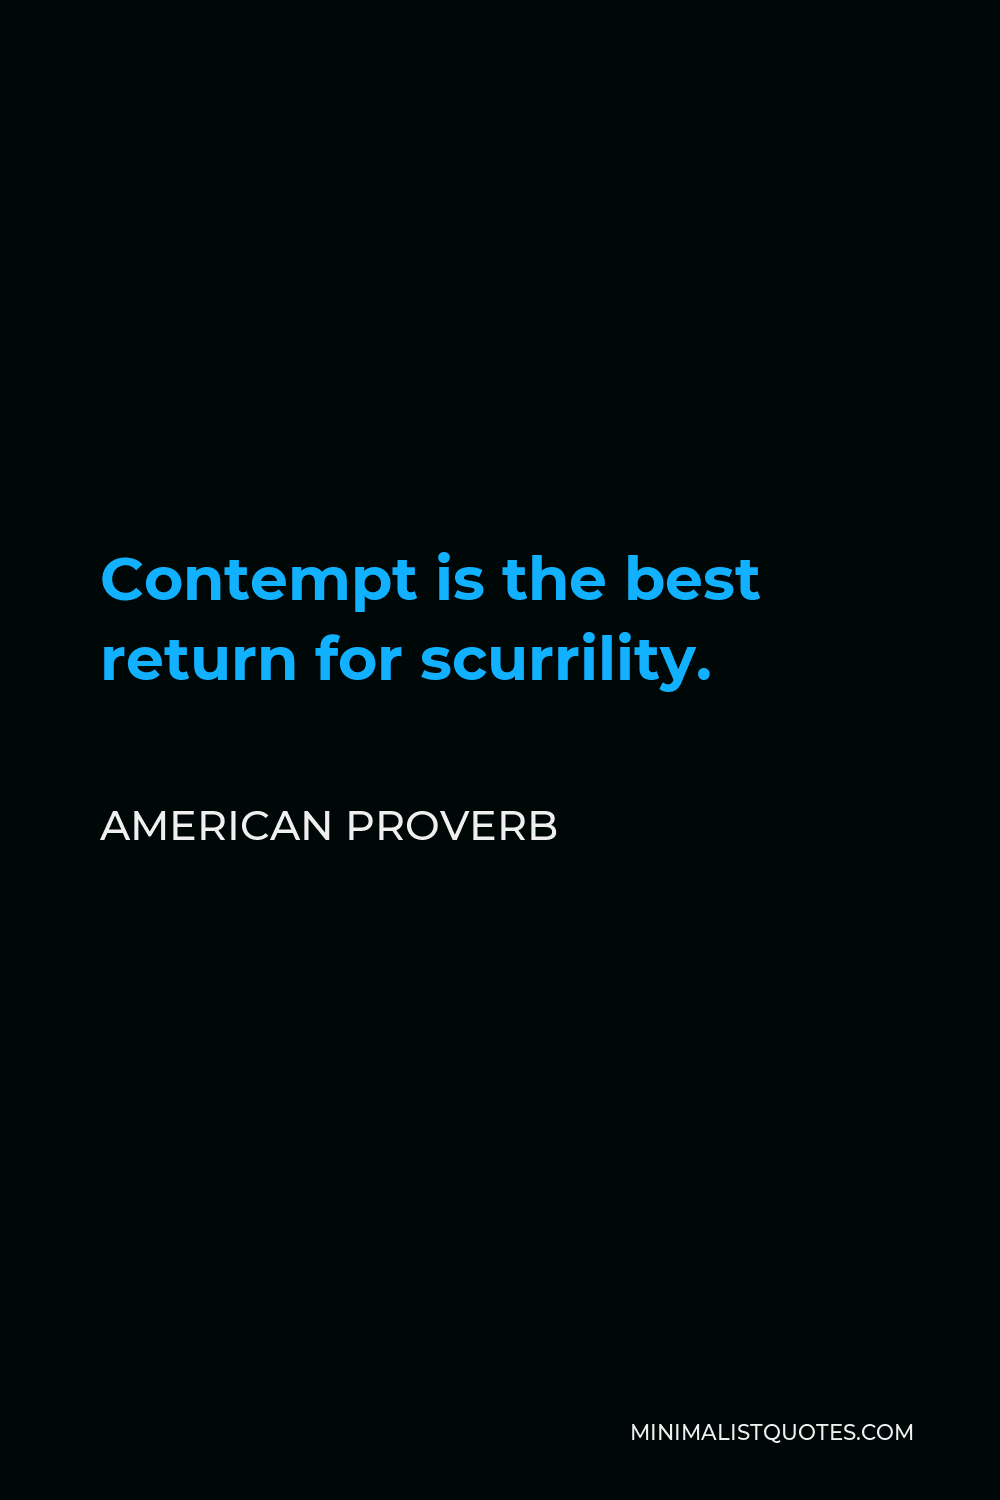 American Proverb Quote - Contempt is the best return for scurrility.